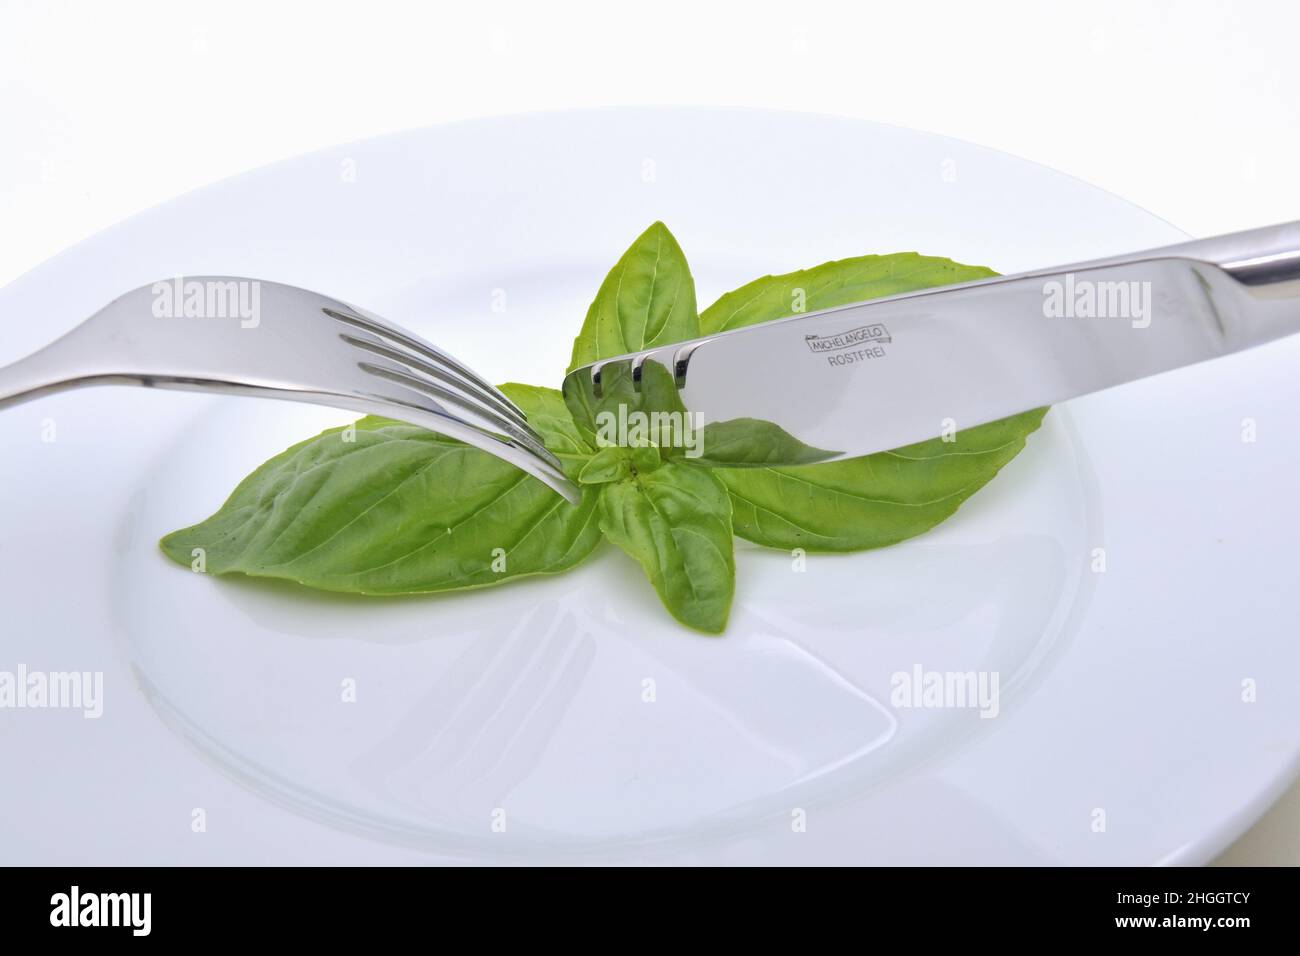 basil leaf on a plate, diet Stock Photo